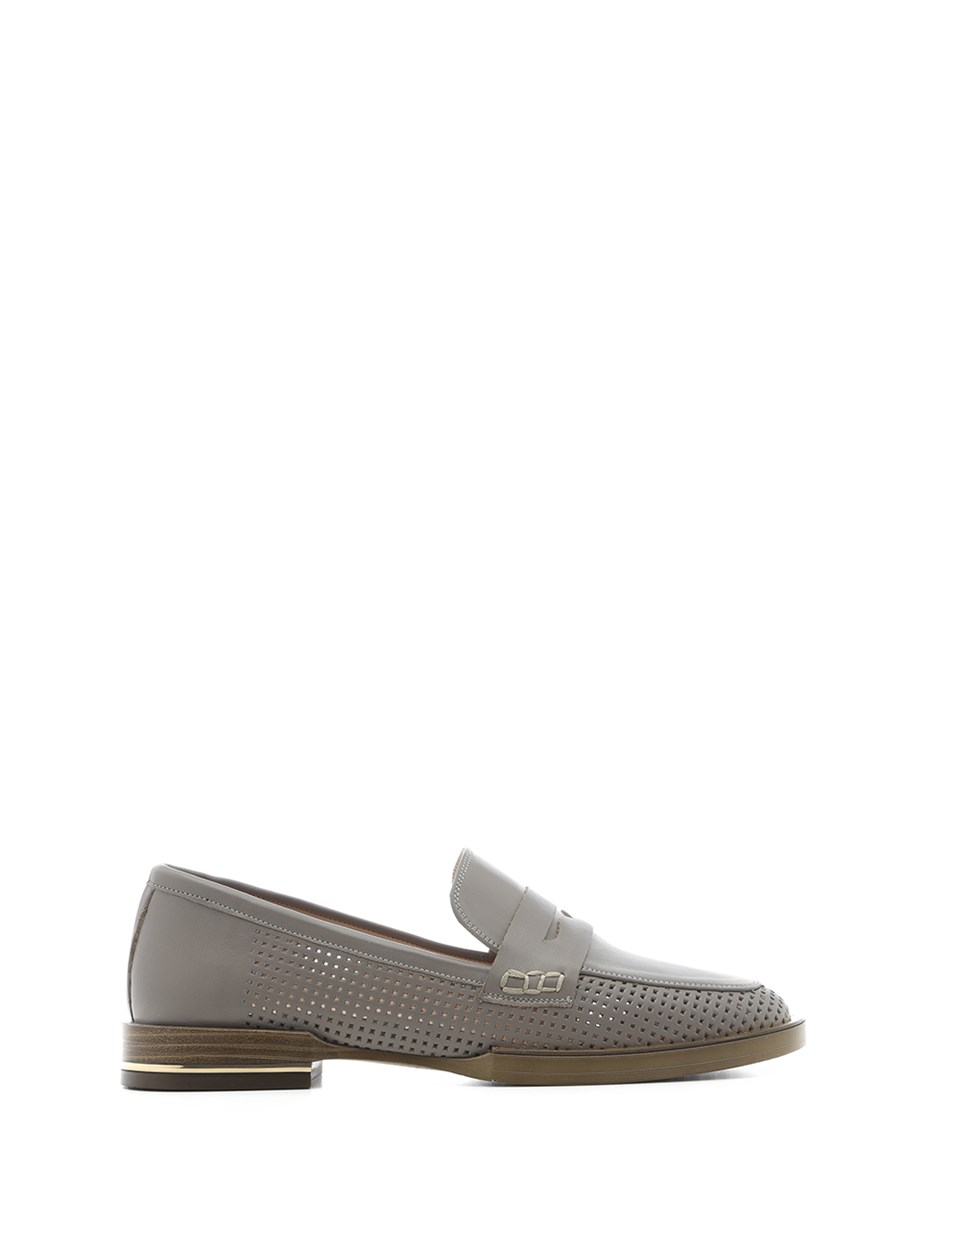 grey loafer womens